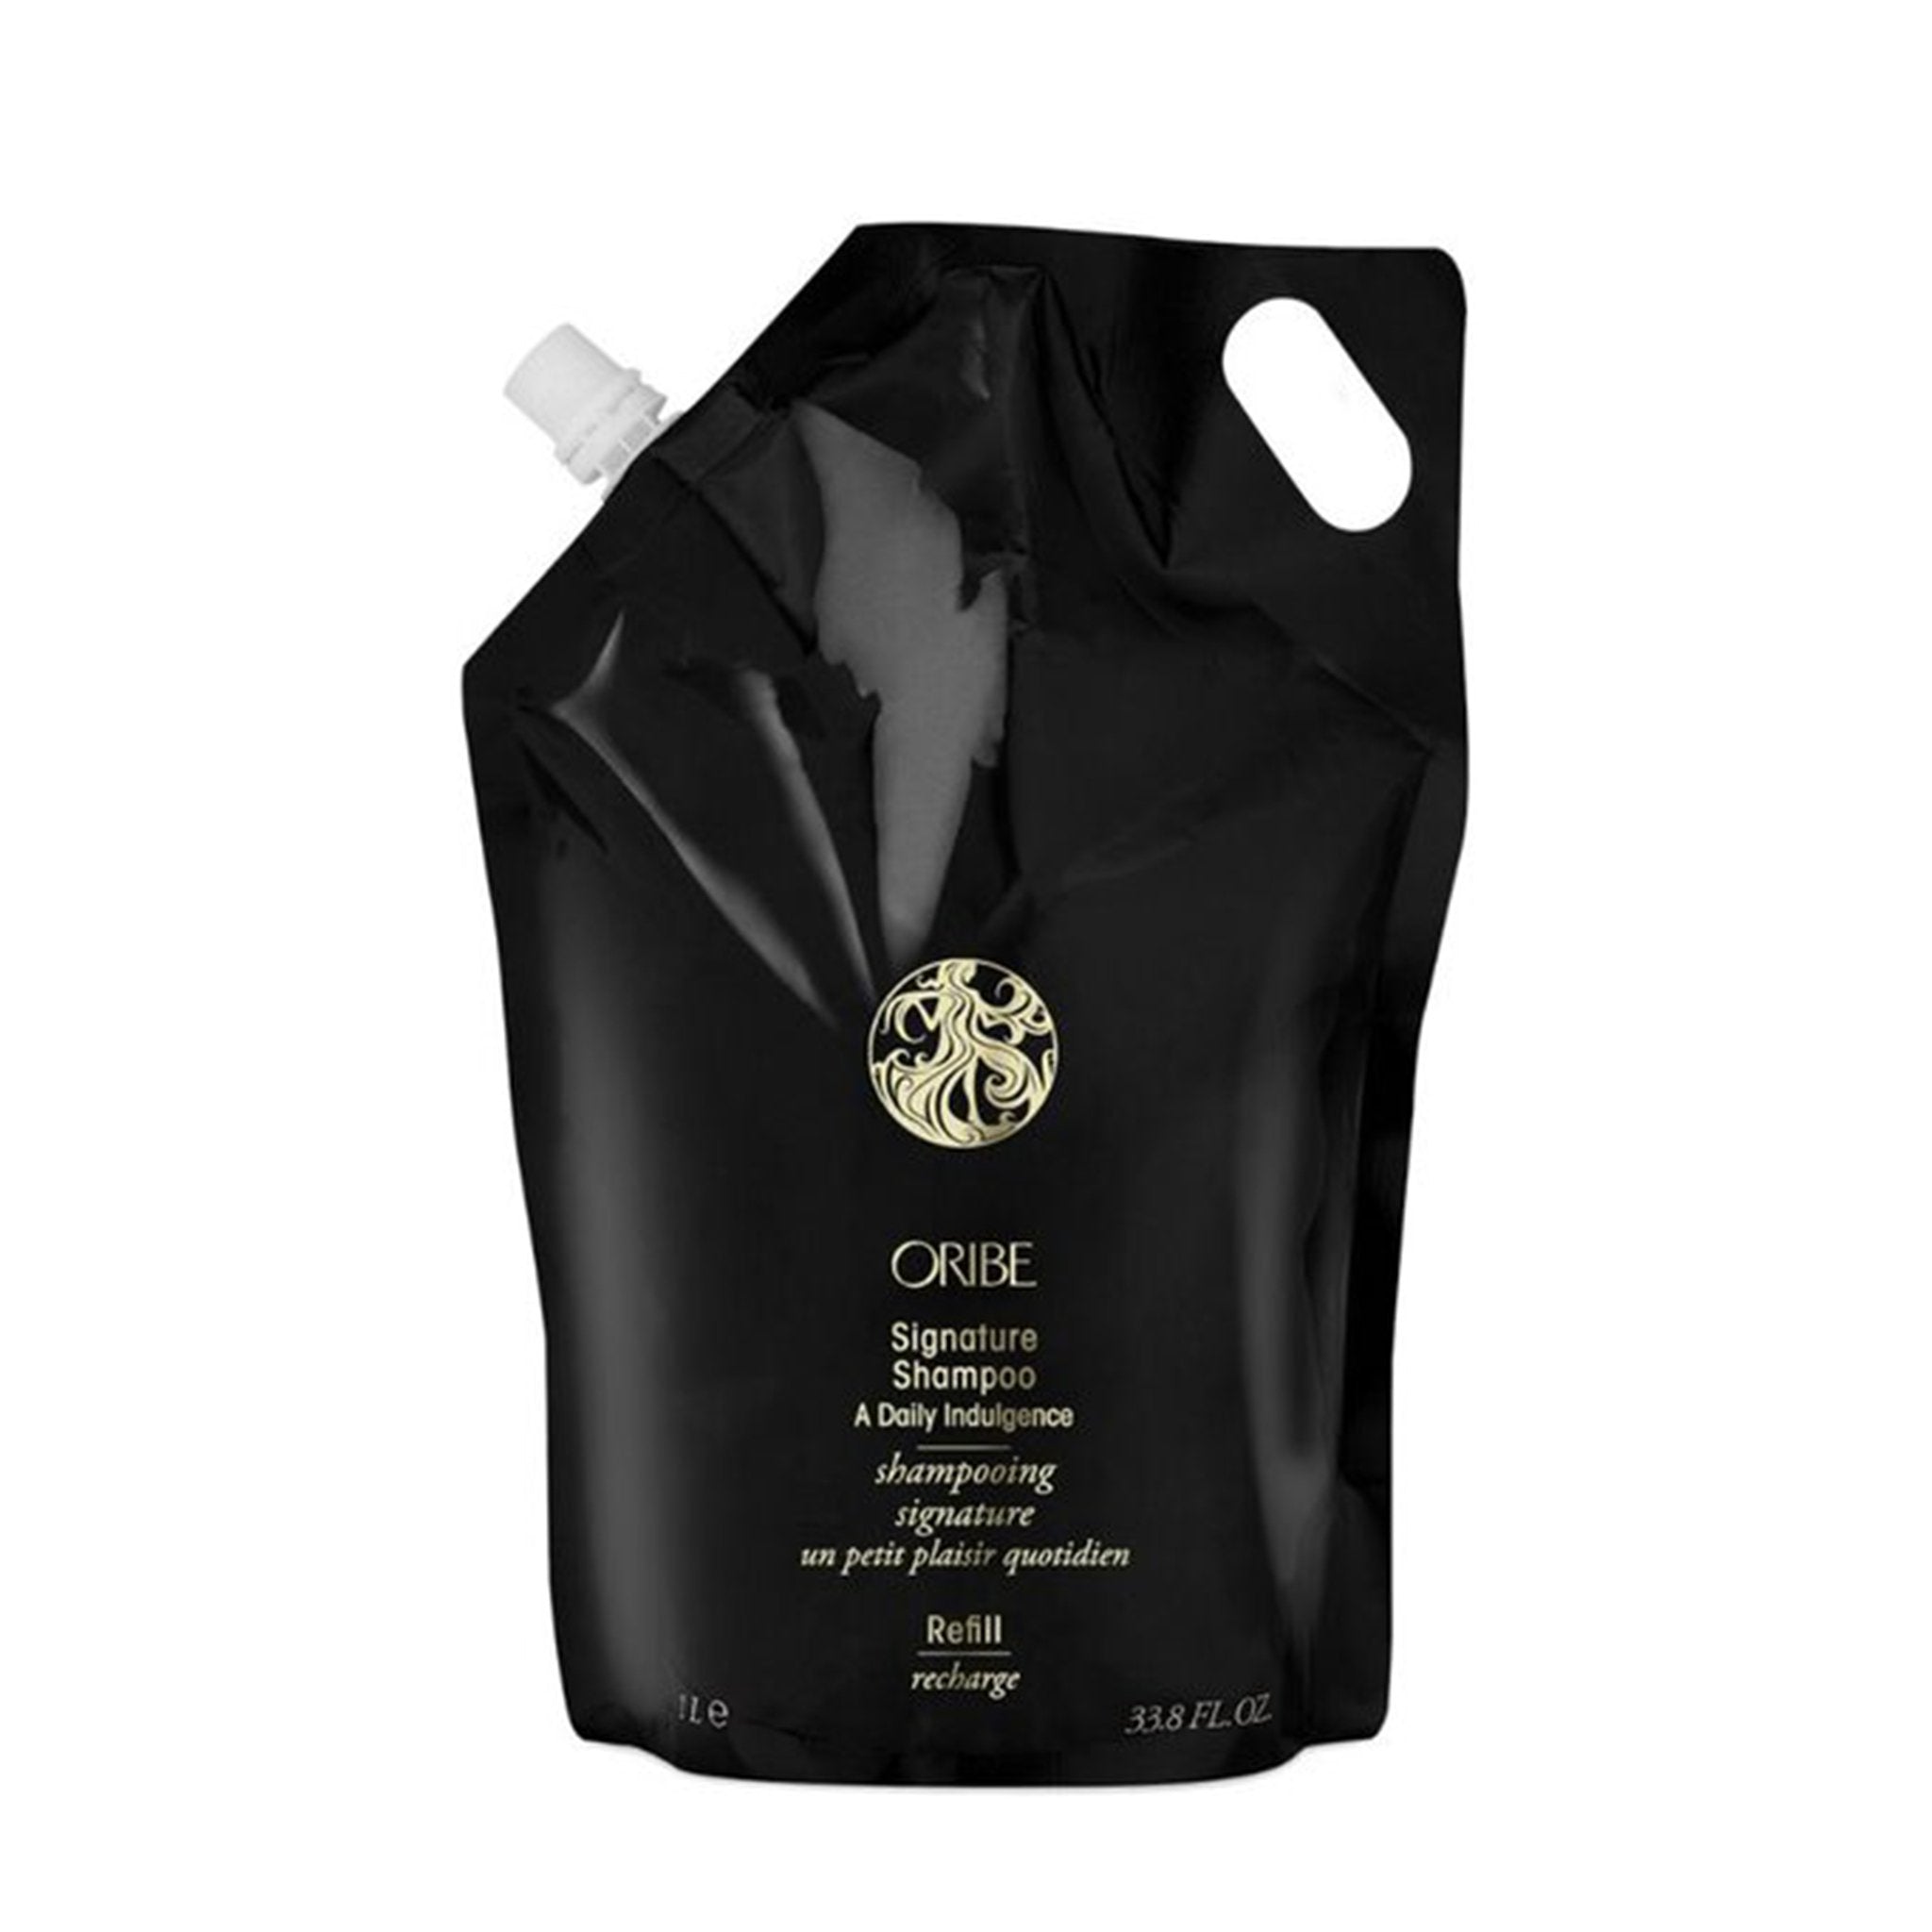 Oribe. Shampoing Signature (Recharge) - 1000 ml - Concept C. Shop